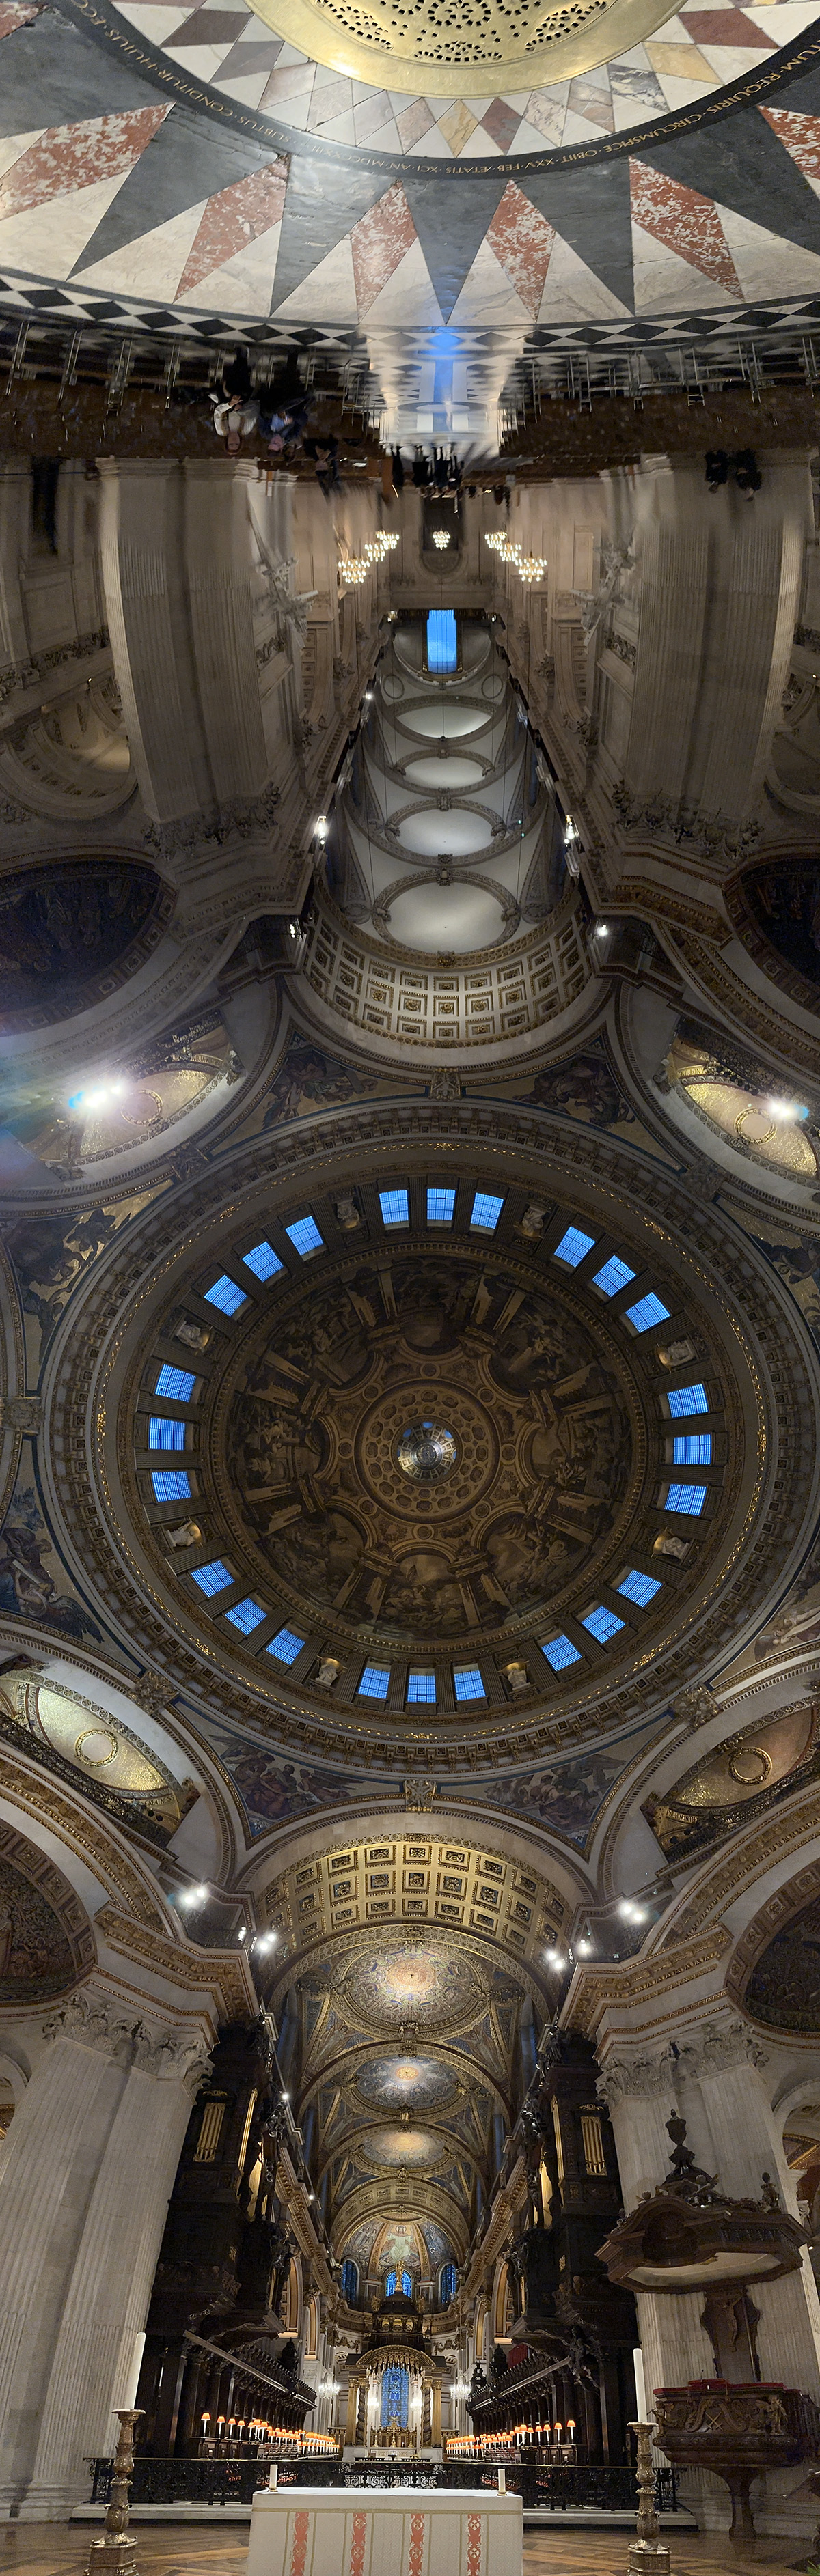 Panoramic view of St. Paul's ceiling